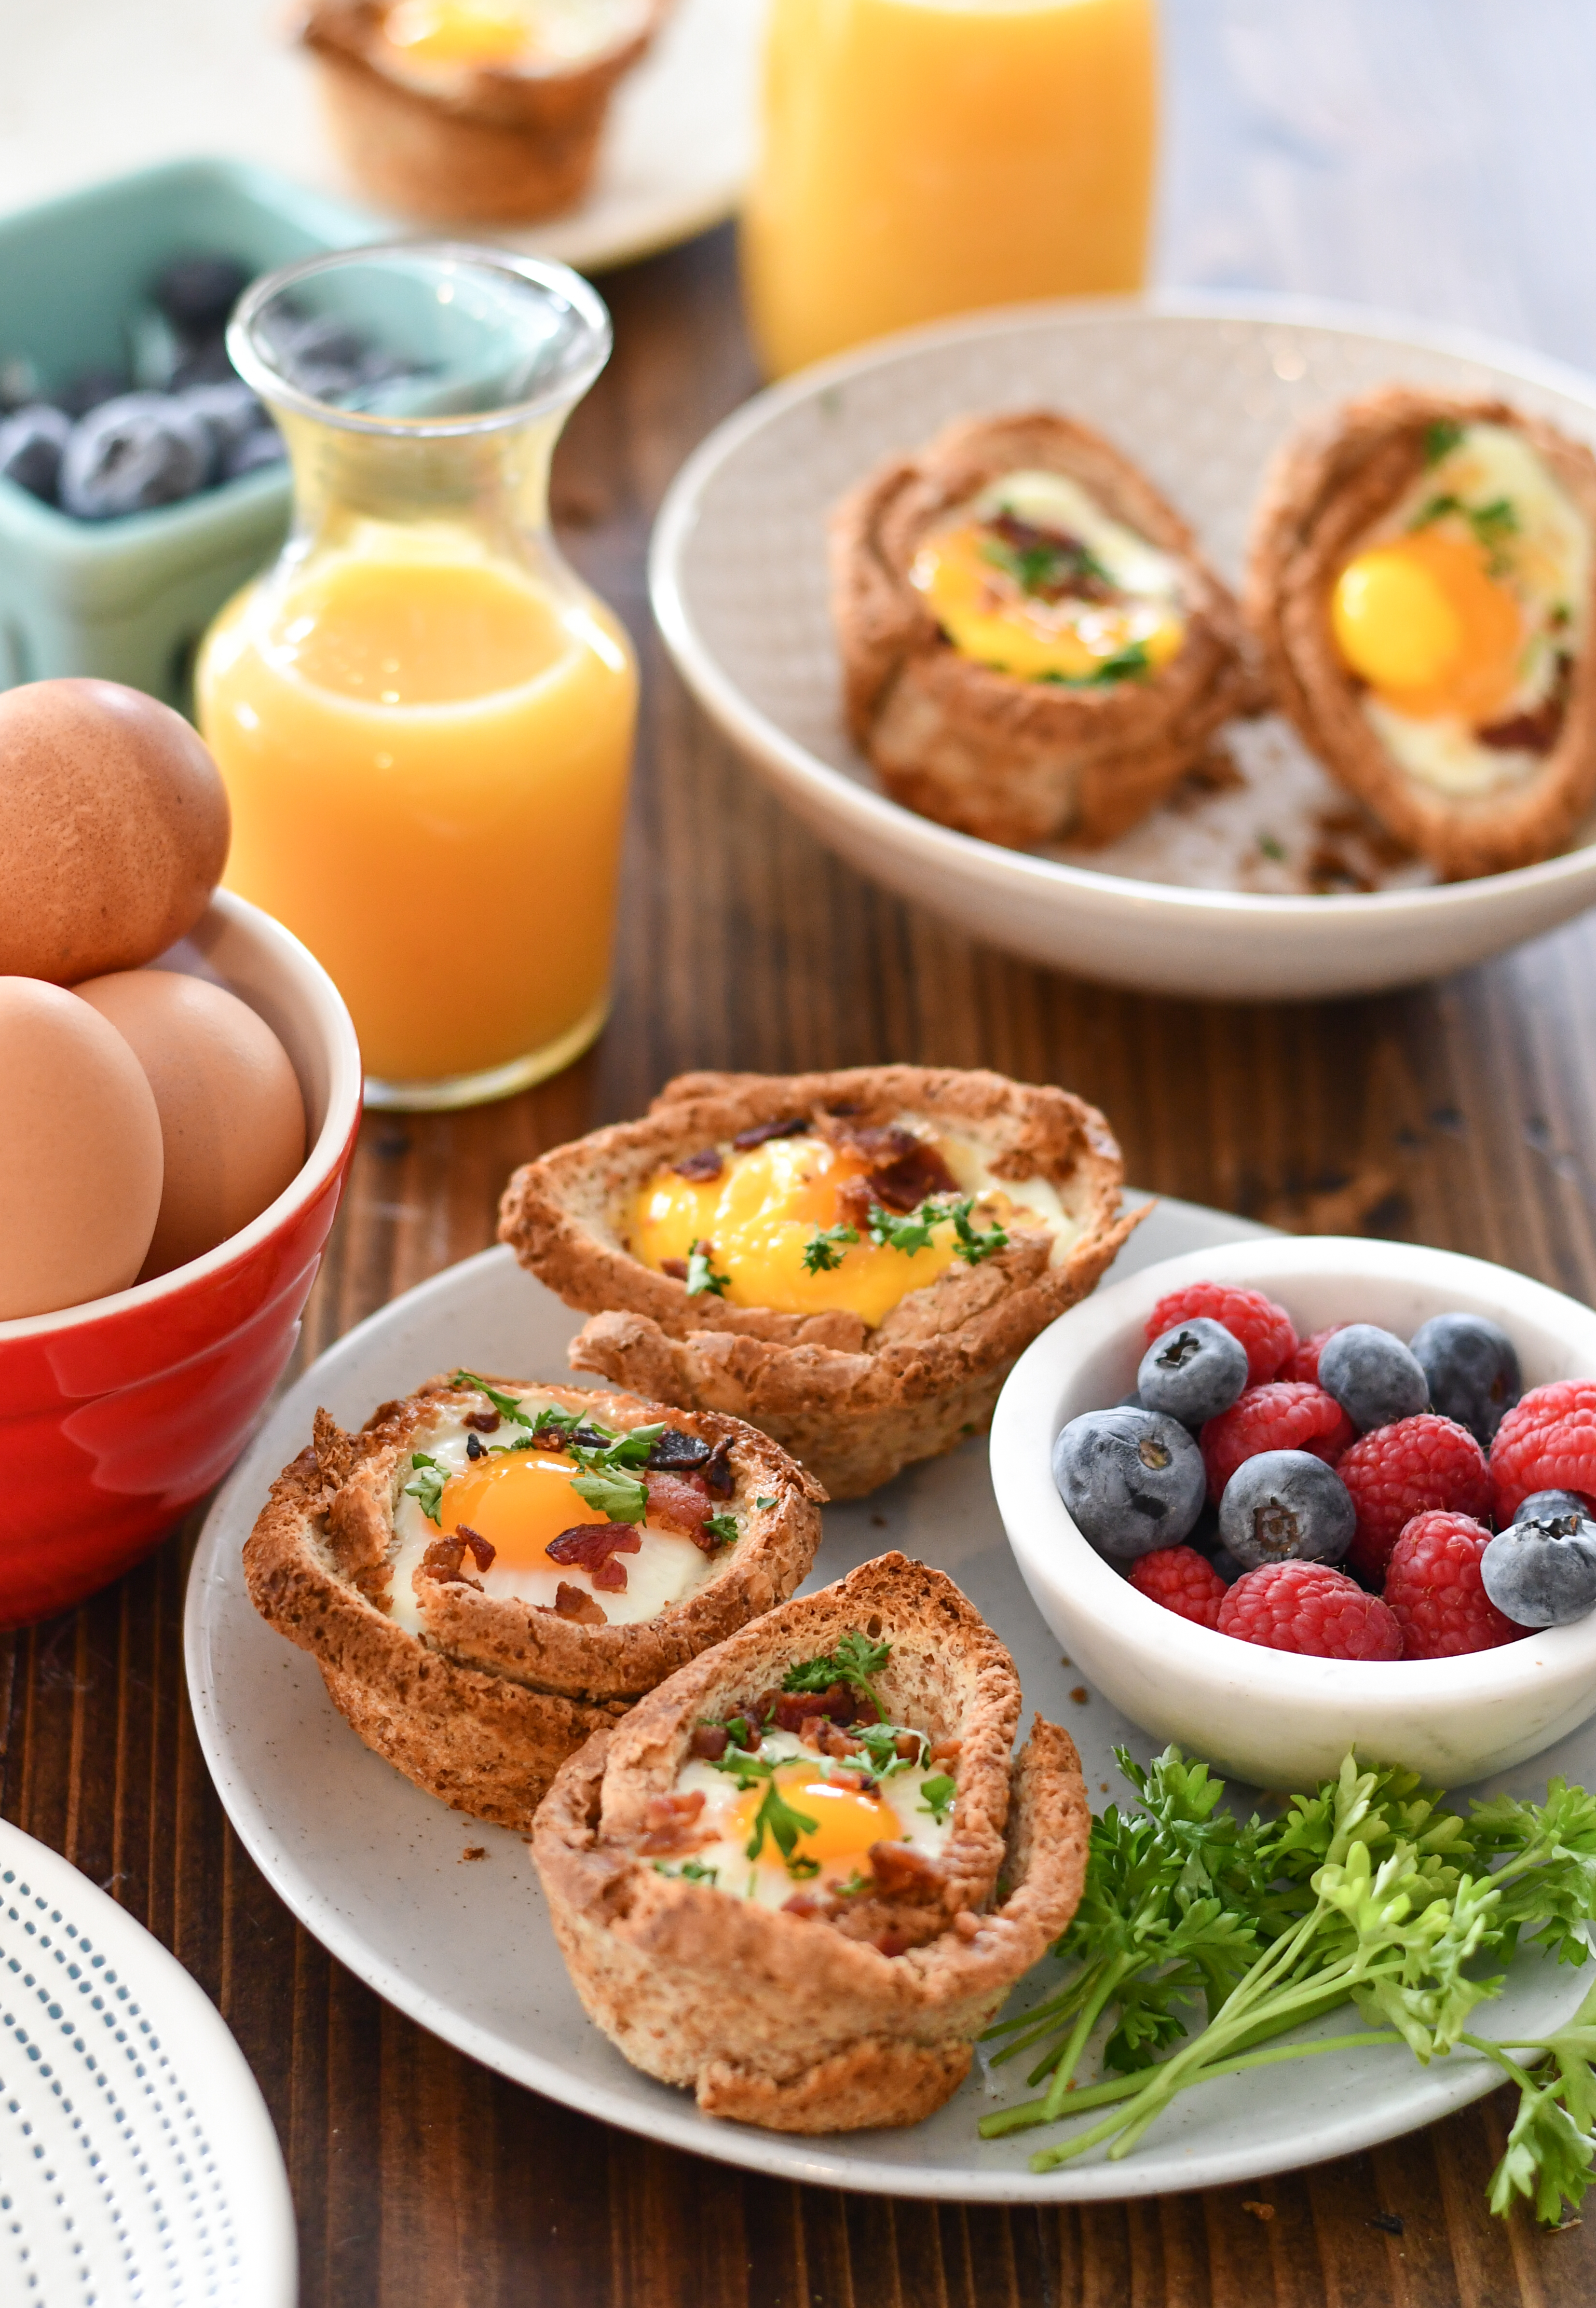 Egg and Toast Cups Recipe